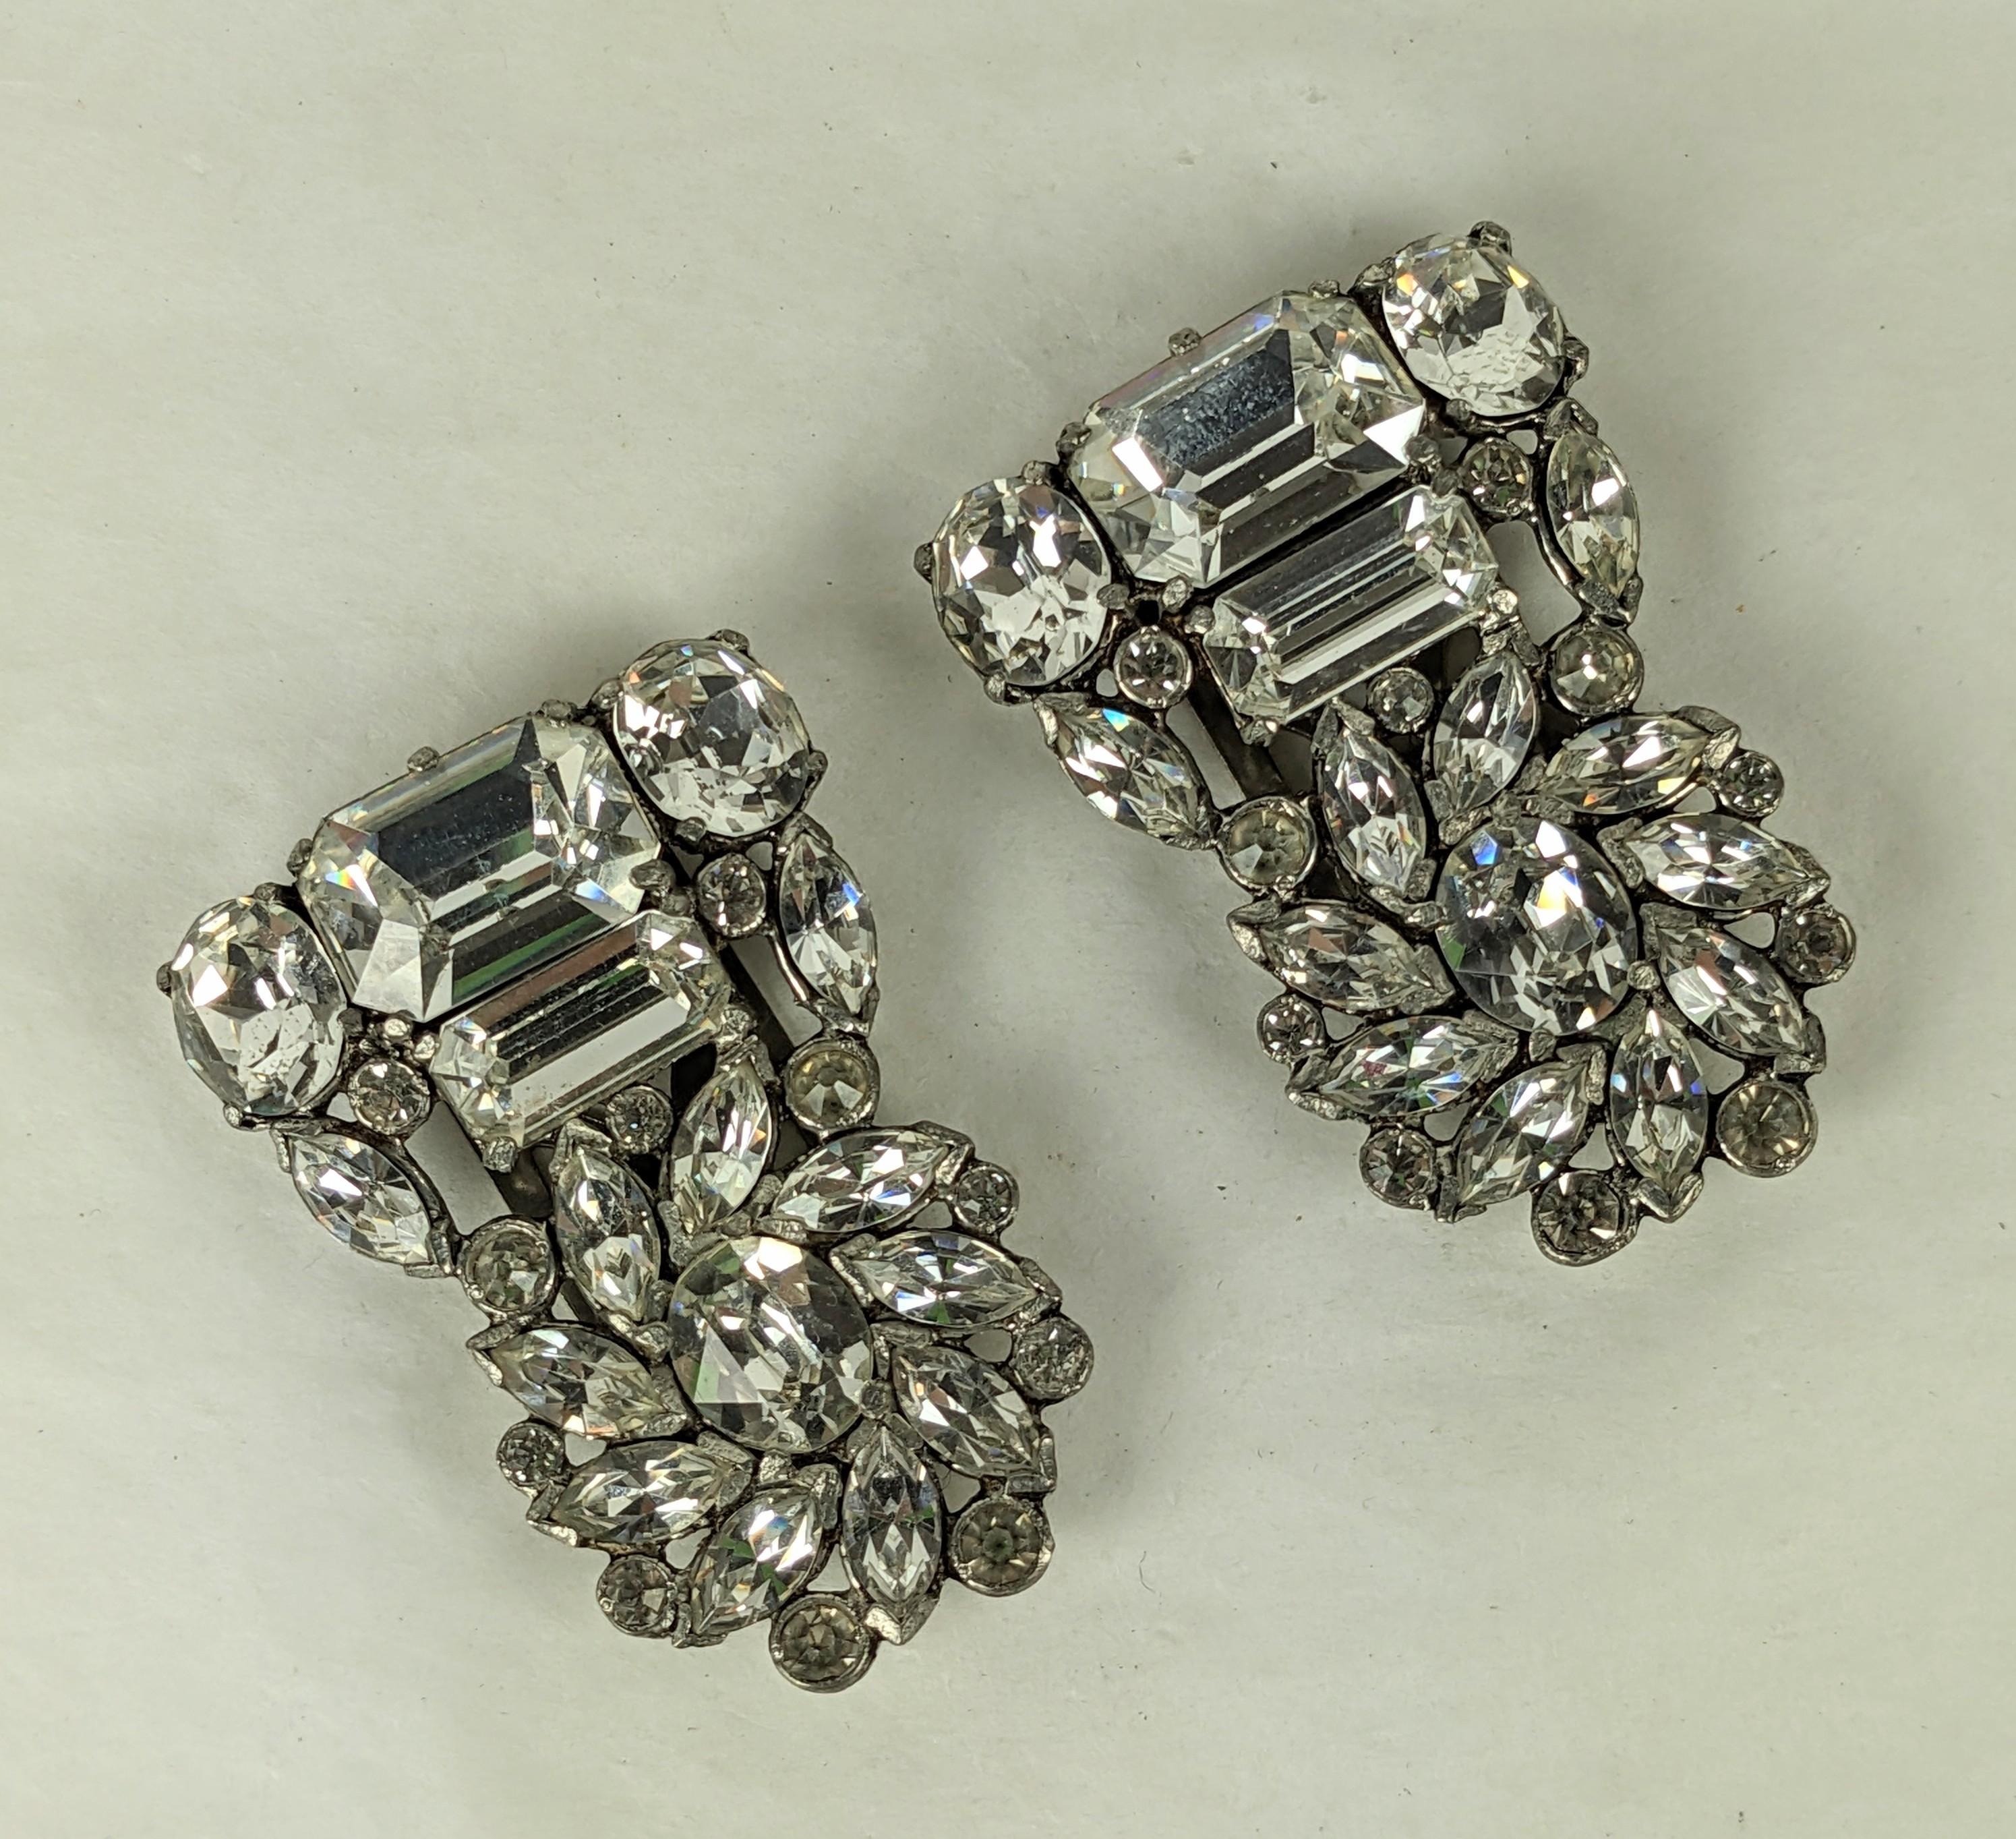 Large Pair of Art Deco Eisenberg Clips from the 1930's. Huge Swarovski crystals set in white metal designed as striking dress clips. Unsigned but definitely made by Eisenberg with signature clip fittings. 1930's USA. Each 2